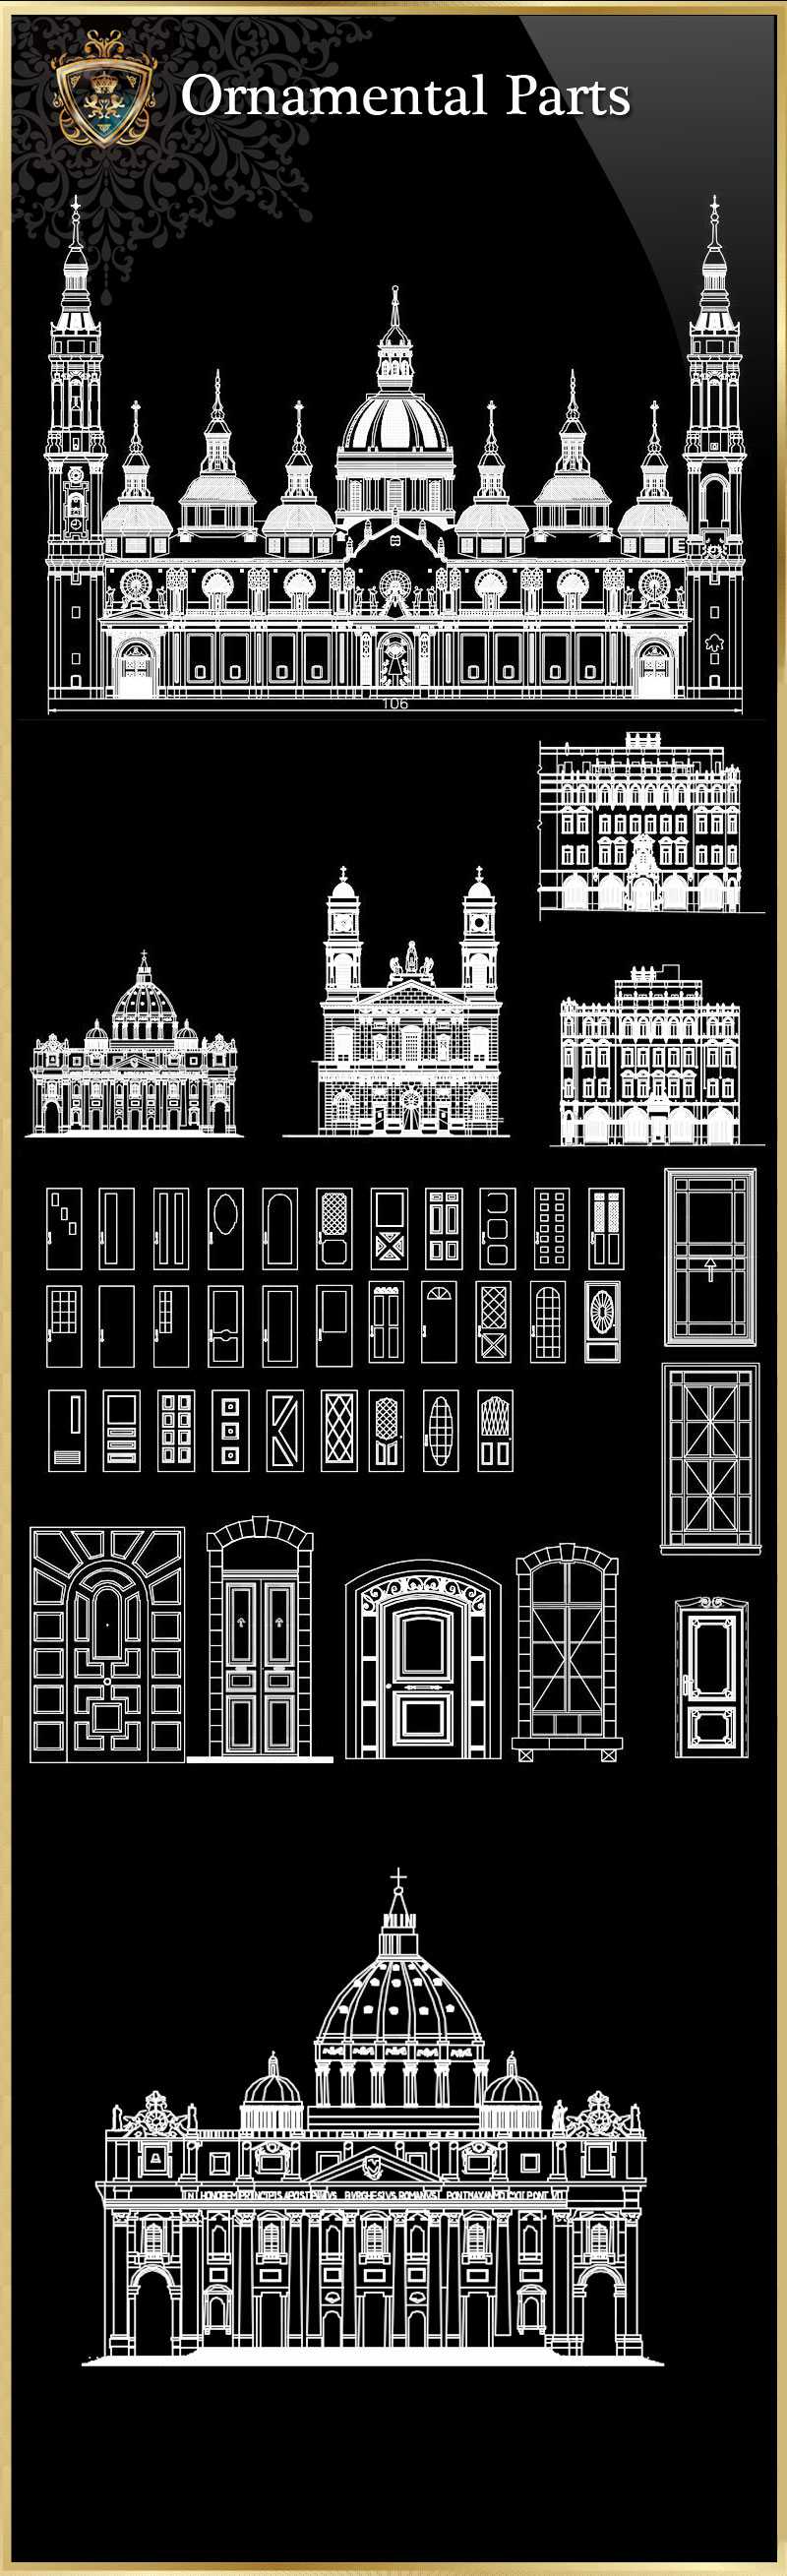 ★【Ornamental Parts of Buildings 3】Download Luxury Architectural Design CAD Drawings--Over 20000+ High quality CAD Blocks and Drawings Download!